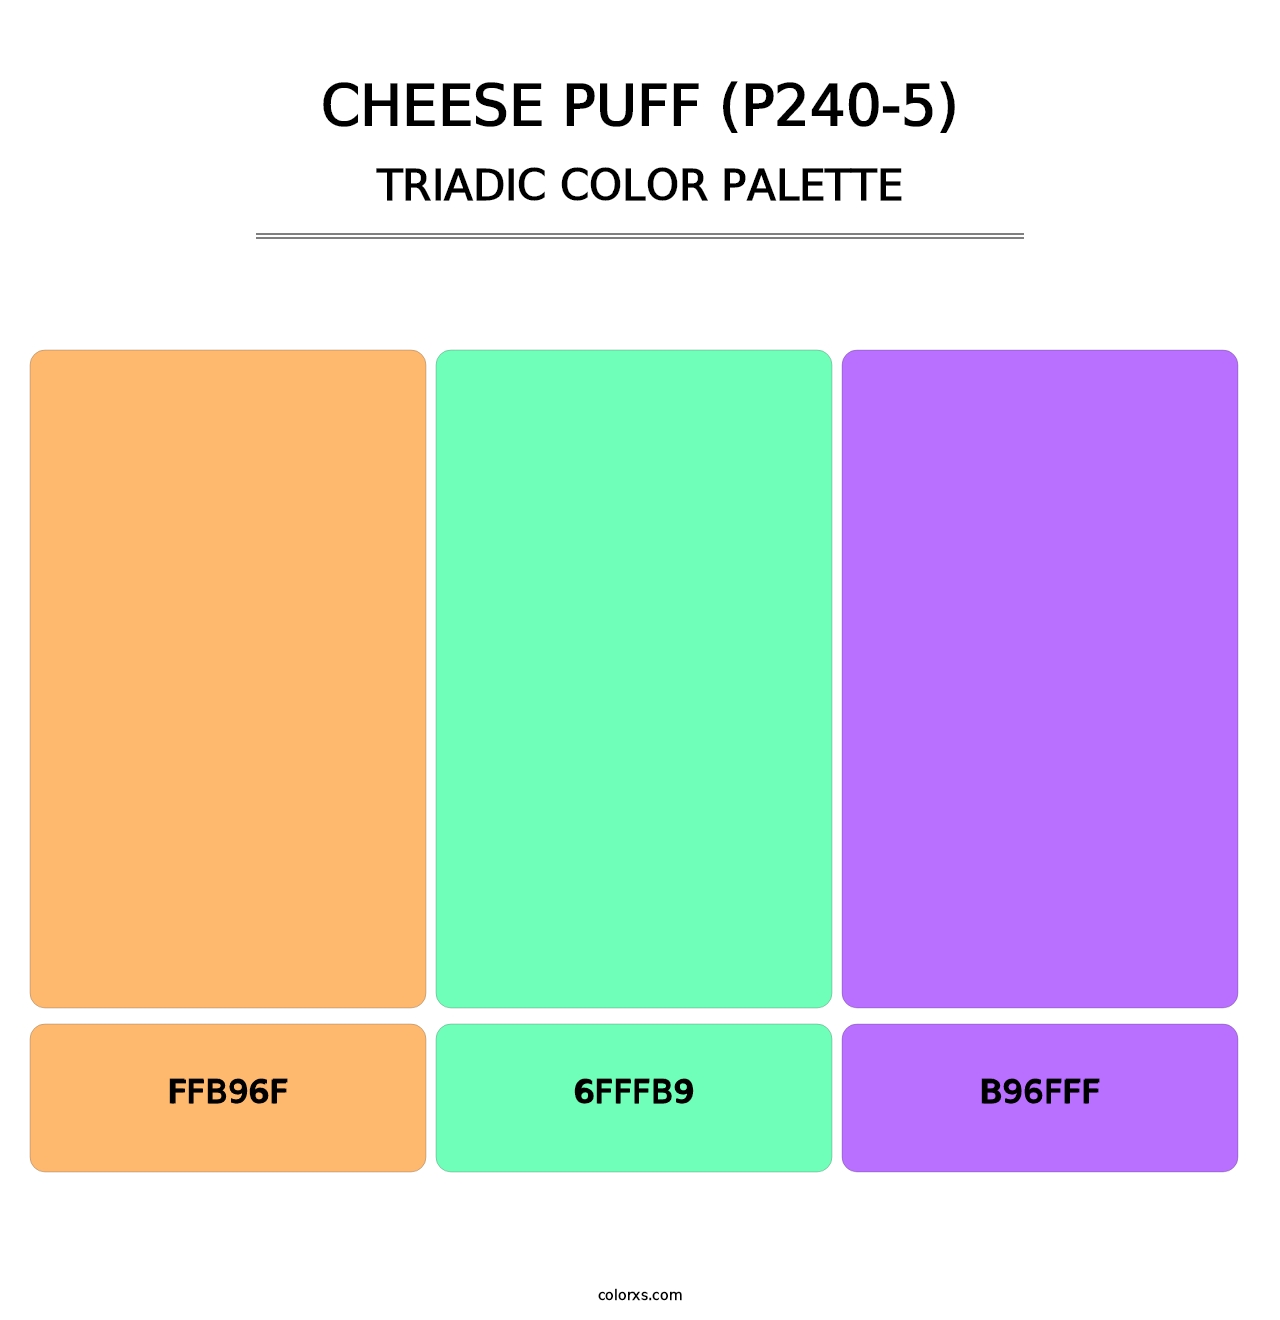 Cheese Puff (P240-5) - Triadic Color Palette